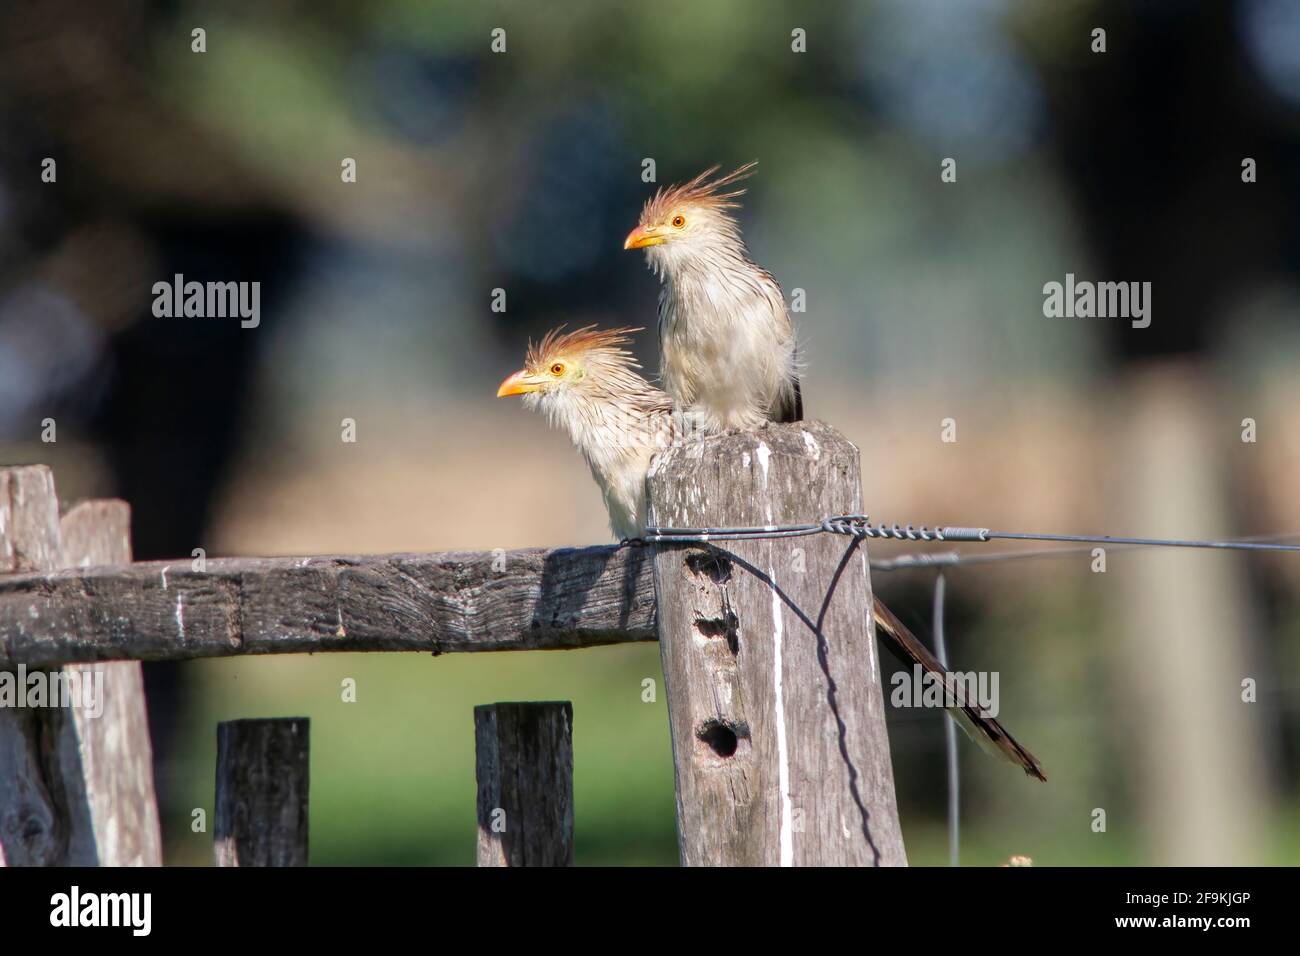 guira cuckoo, Guira guira, adult perched on wooden fence, Montevideo, Uruguay Stock Photo